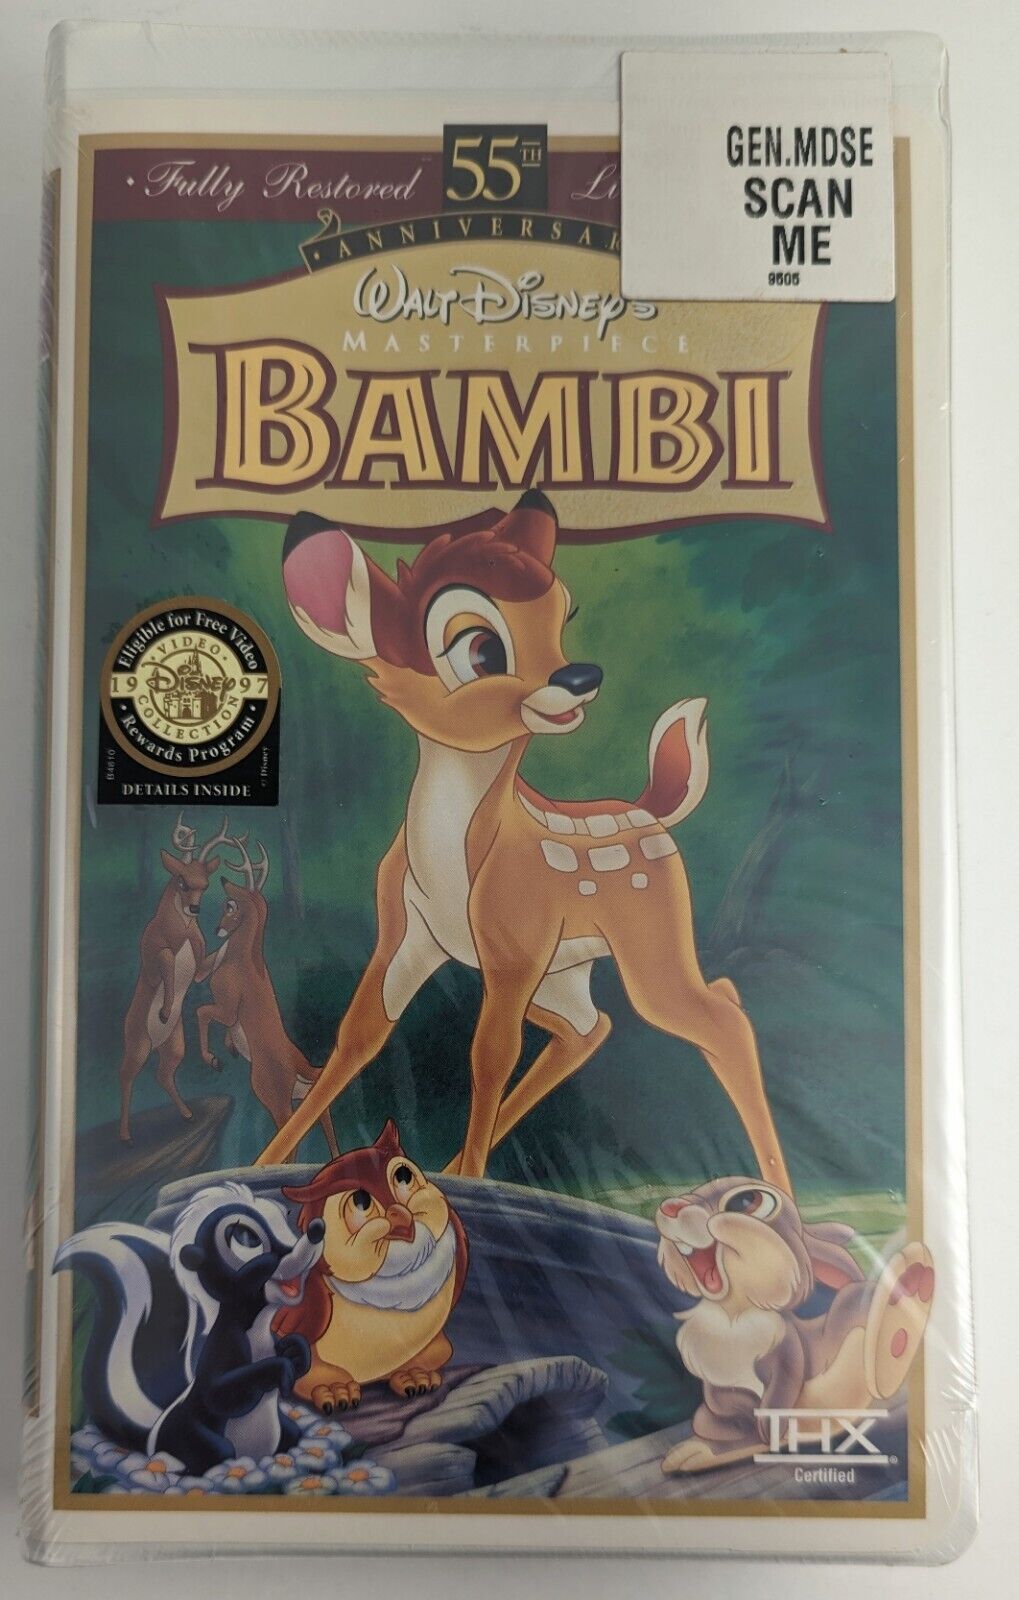 Bambi Walt Disney  VHS Fully Restored 55th Anniversary Limited Edition SEALED